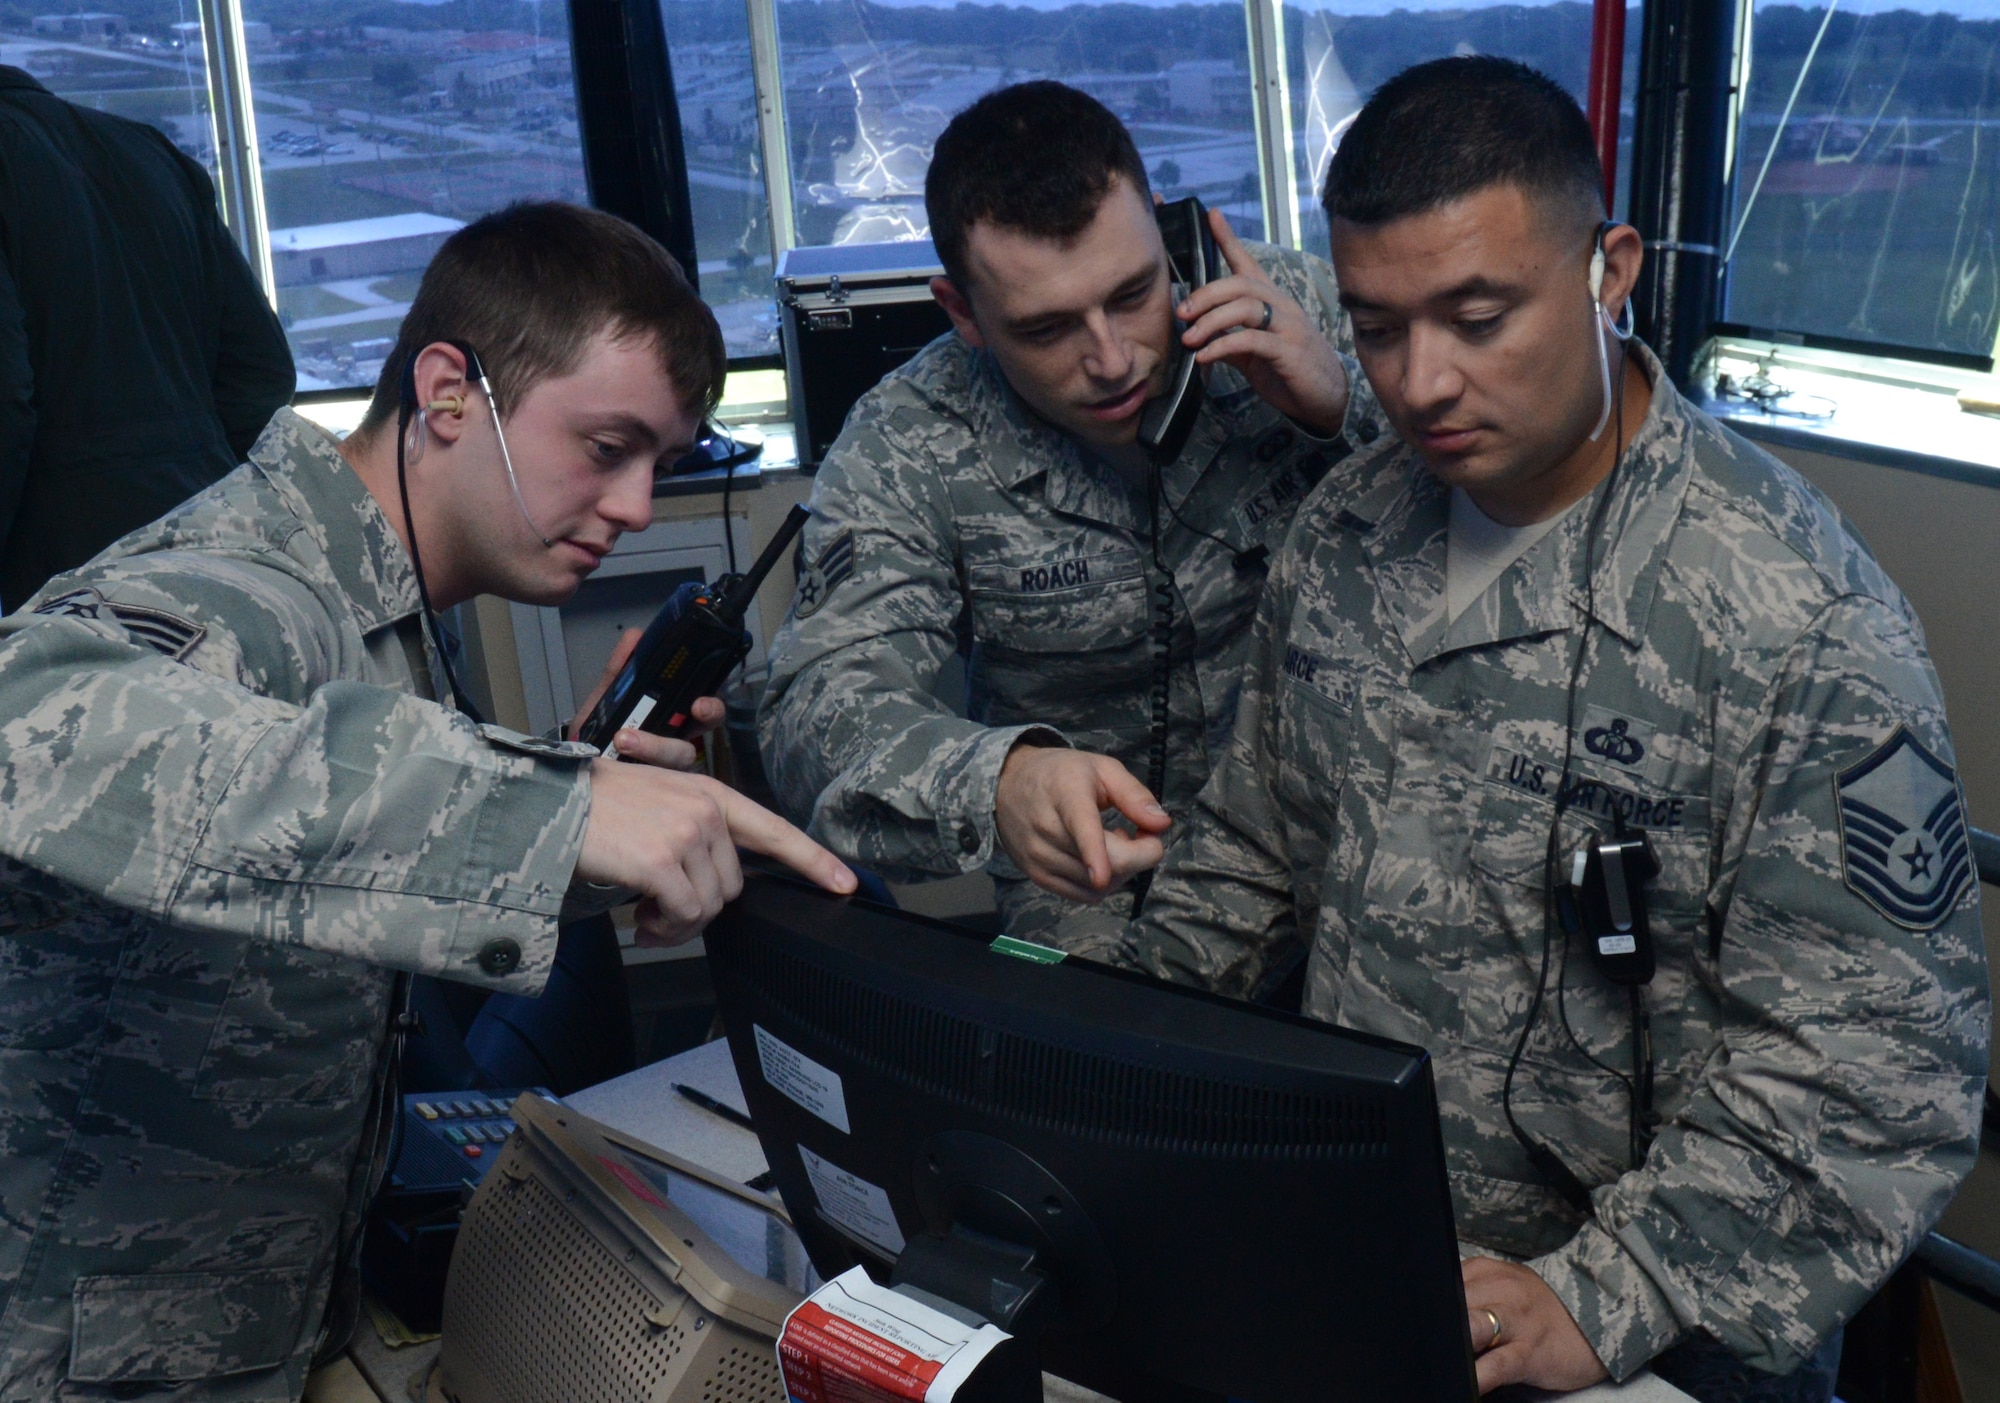 (From left) U. S. Air Force Senior Airmen Michael-Paul Kendall, Shaun Roach, and Master Sgt. Joseph Arce, 36th Operations Support Squadron air traffic controllers, look at the daily events log Feb. 24, 2014, on Andersen Air Force Base, Guam, during Exercise Cope North 2014. The exercise, which is a joint effort between the U.S. Air Force, the Japan Air Self-Defense Force and the Royal Australian Air Force, is designed for allies to work together on both humanitarian assistance and disaster relief (HA/DR) missions as well as large force employment mission with dissimilar aircraft. (U.S. Air Force photo by Airman 1st Class Emily A. Bradley/Released)